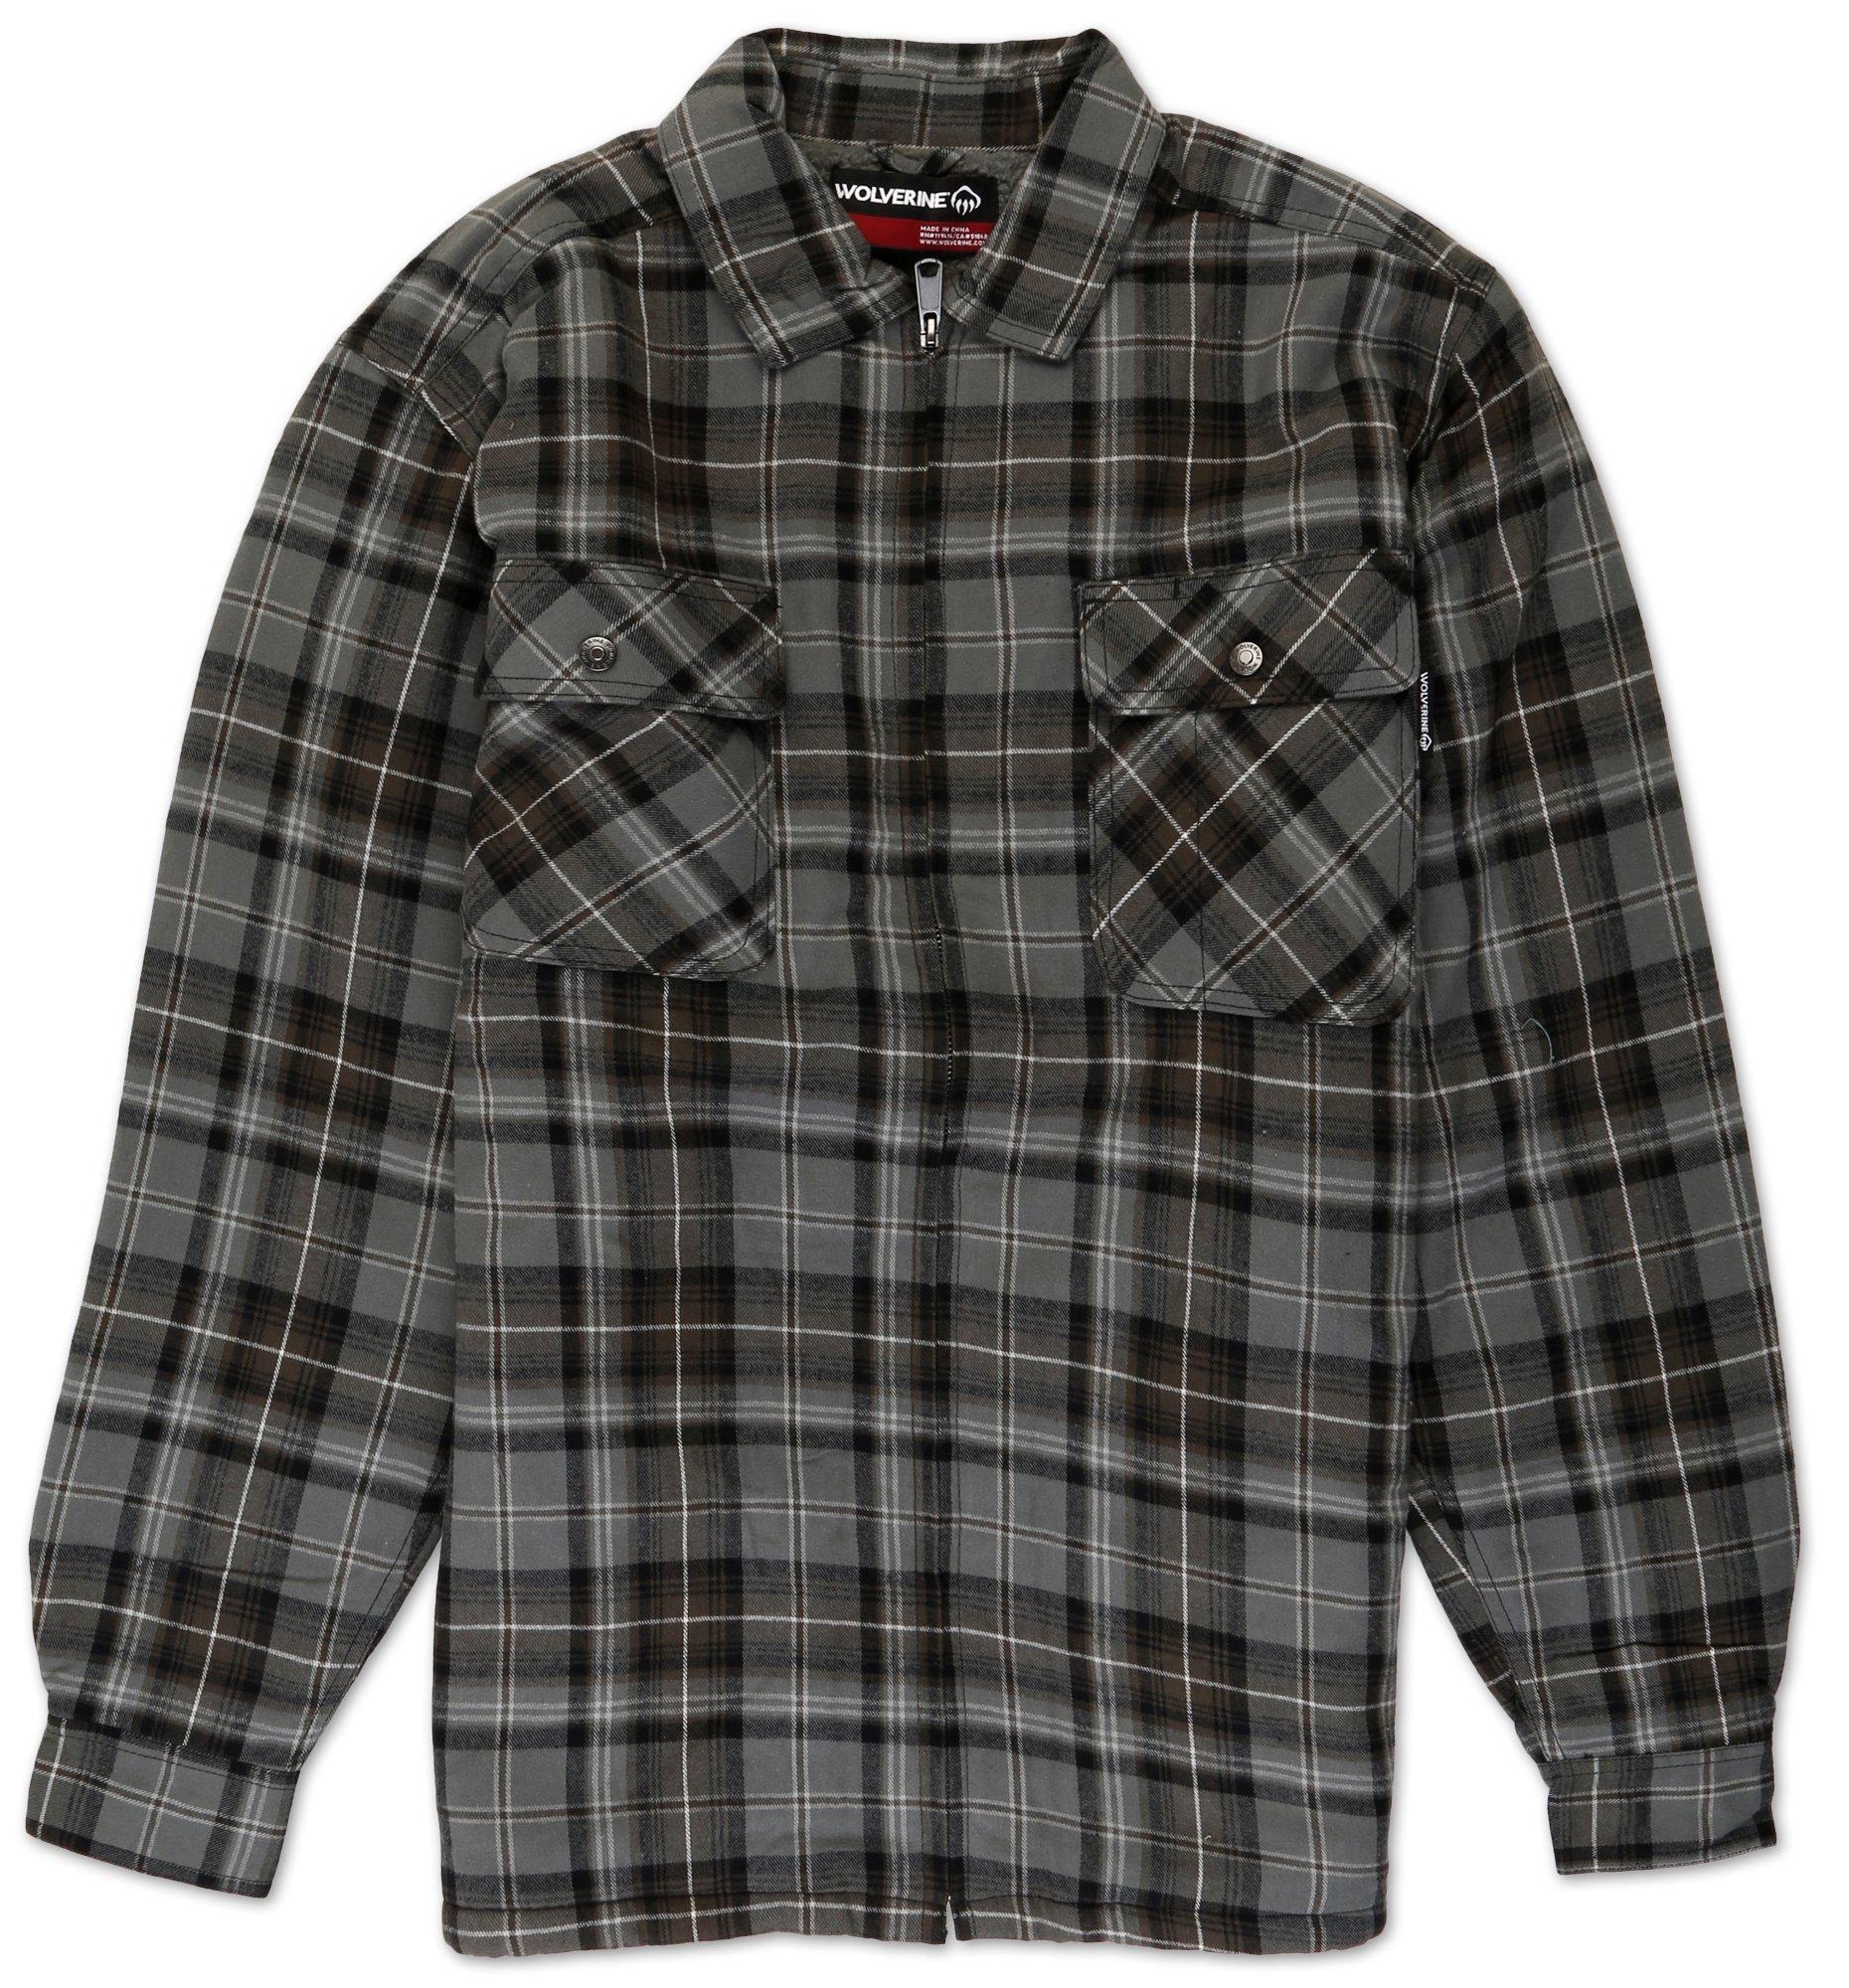 Men's Outdoor Plaid Sherpa Lined Zip-Up Flannel - Grey